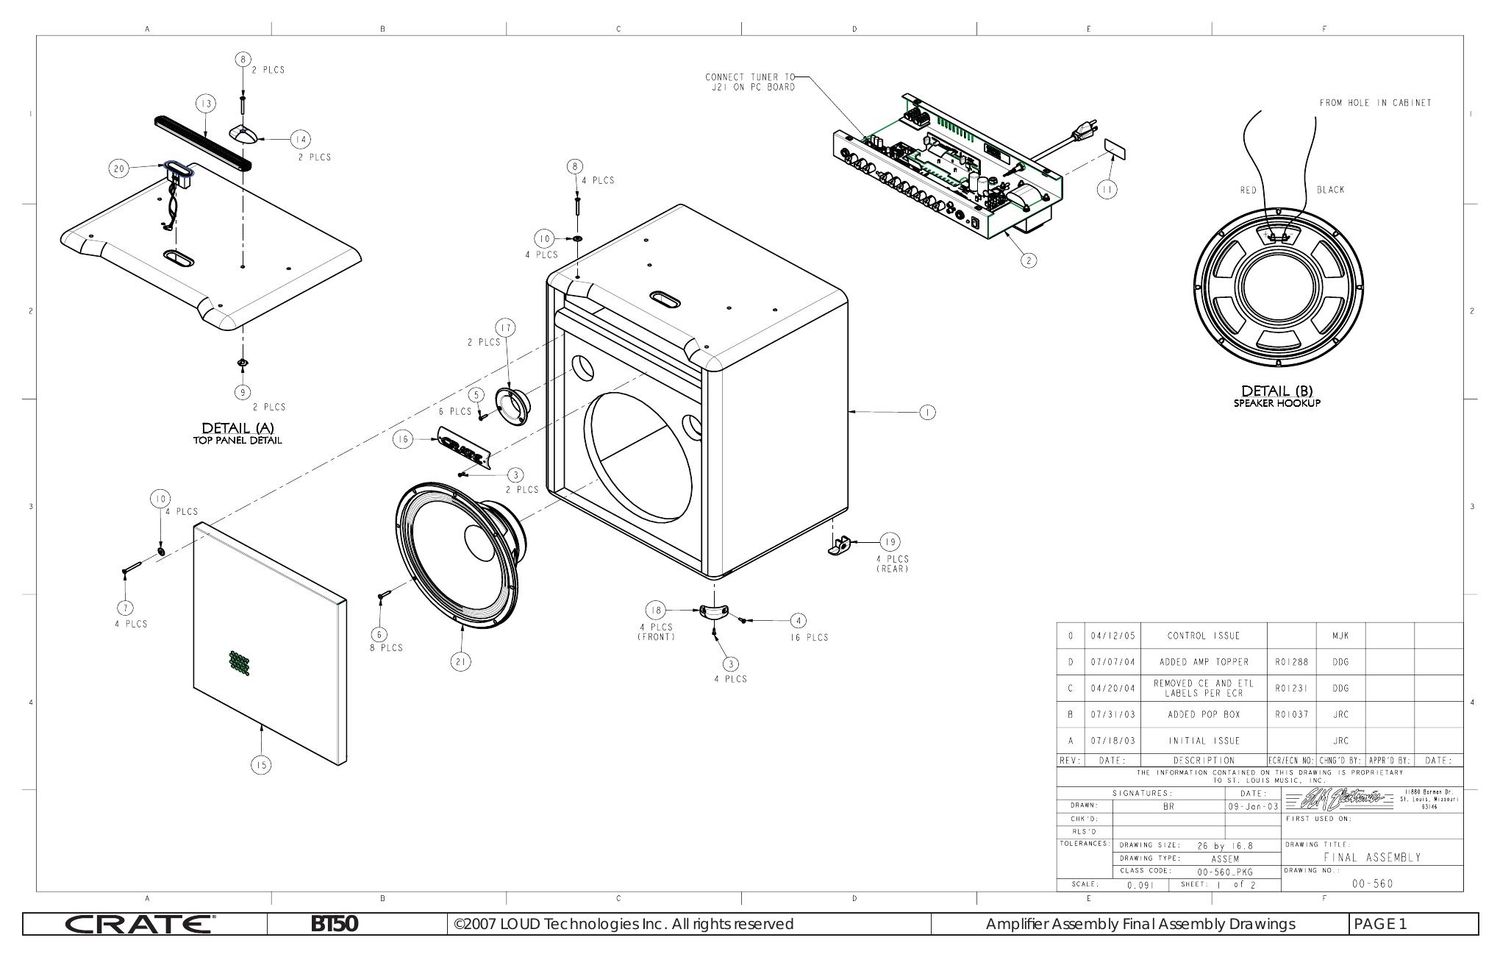 crate bt 50 Amplifier Assembly Final Assembly Drawings 00 560 0